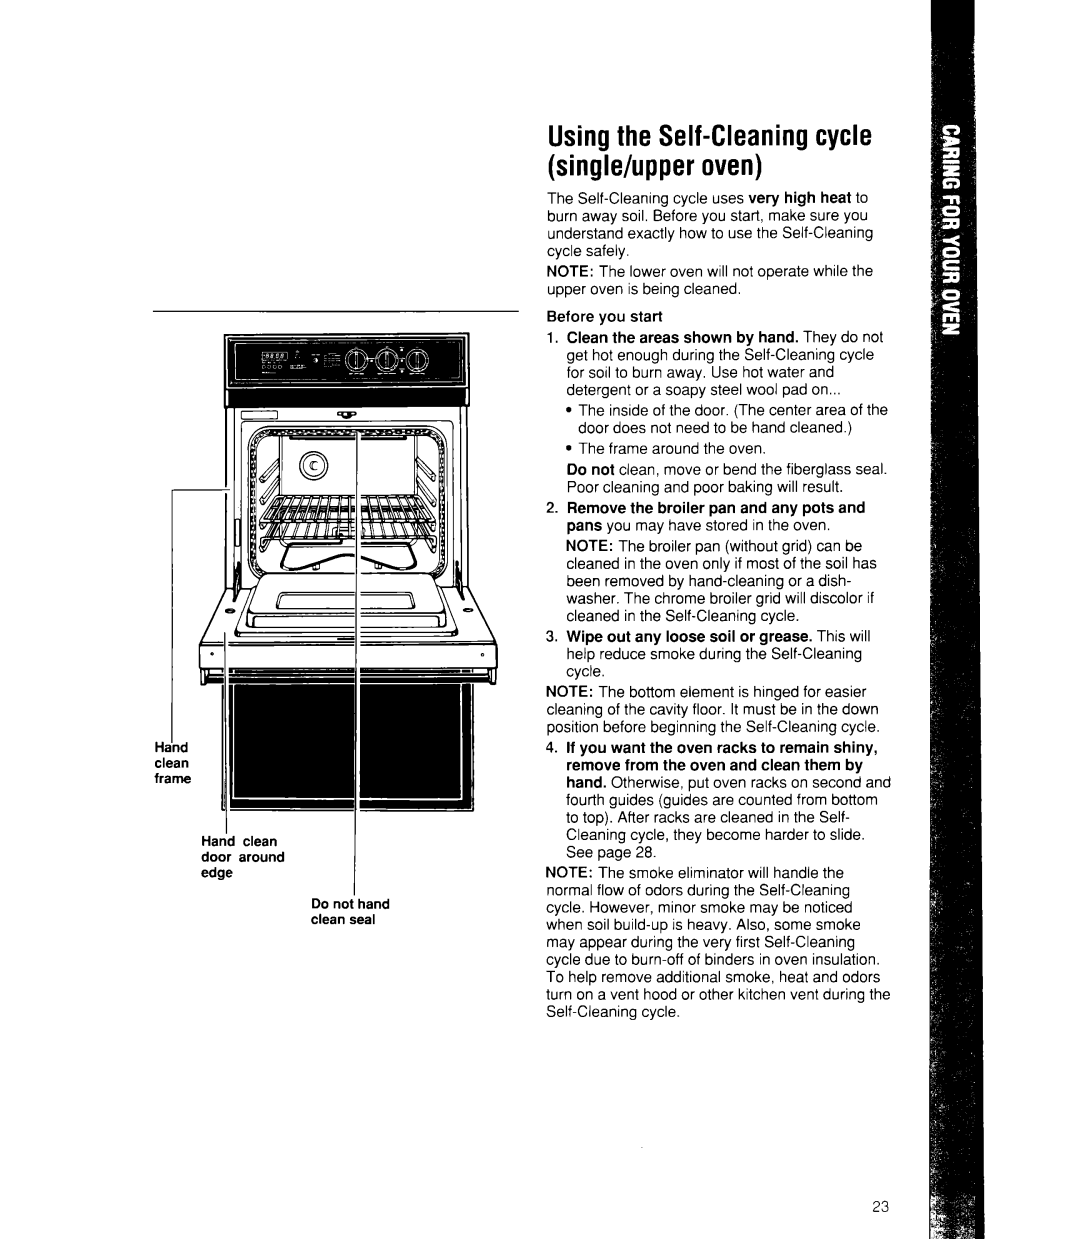 Whirlpool RB160PXX, RB770PXX, RB760PXX, RB170PXX manual Using the Self-Cleaningcycle single/upper oven 